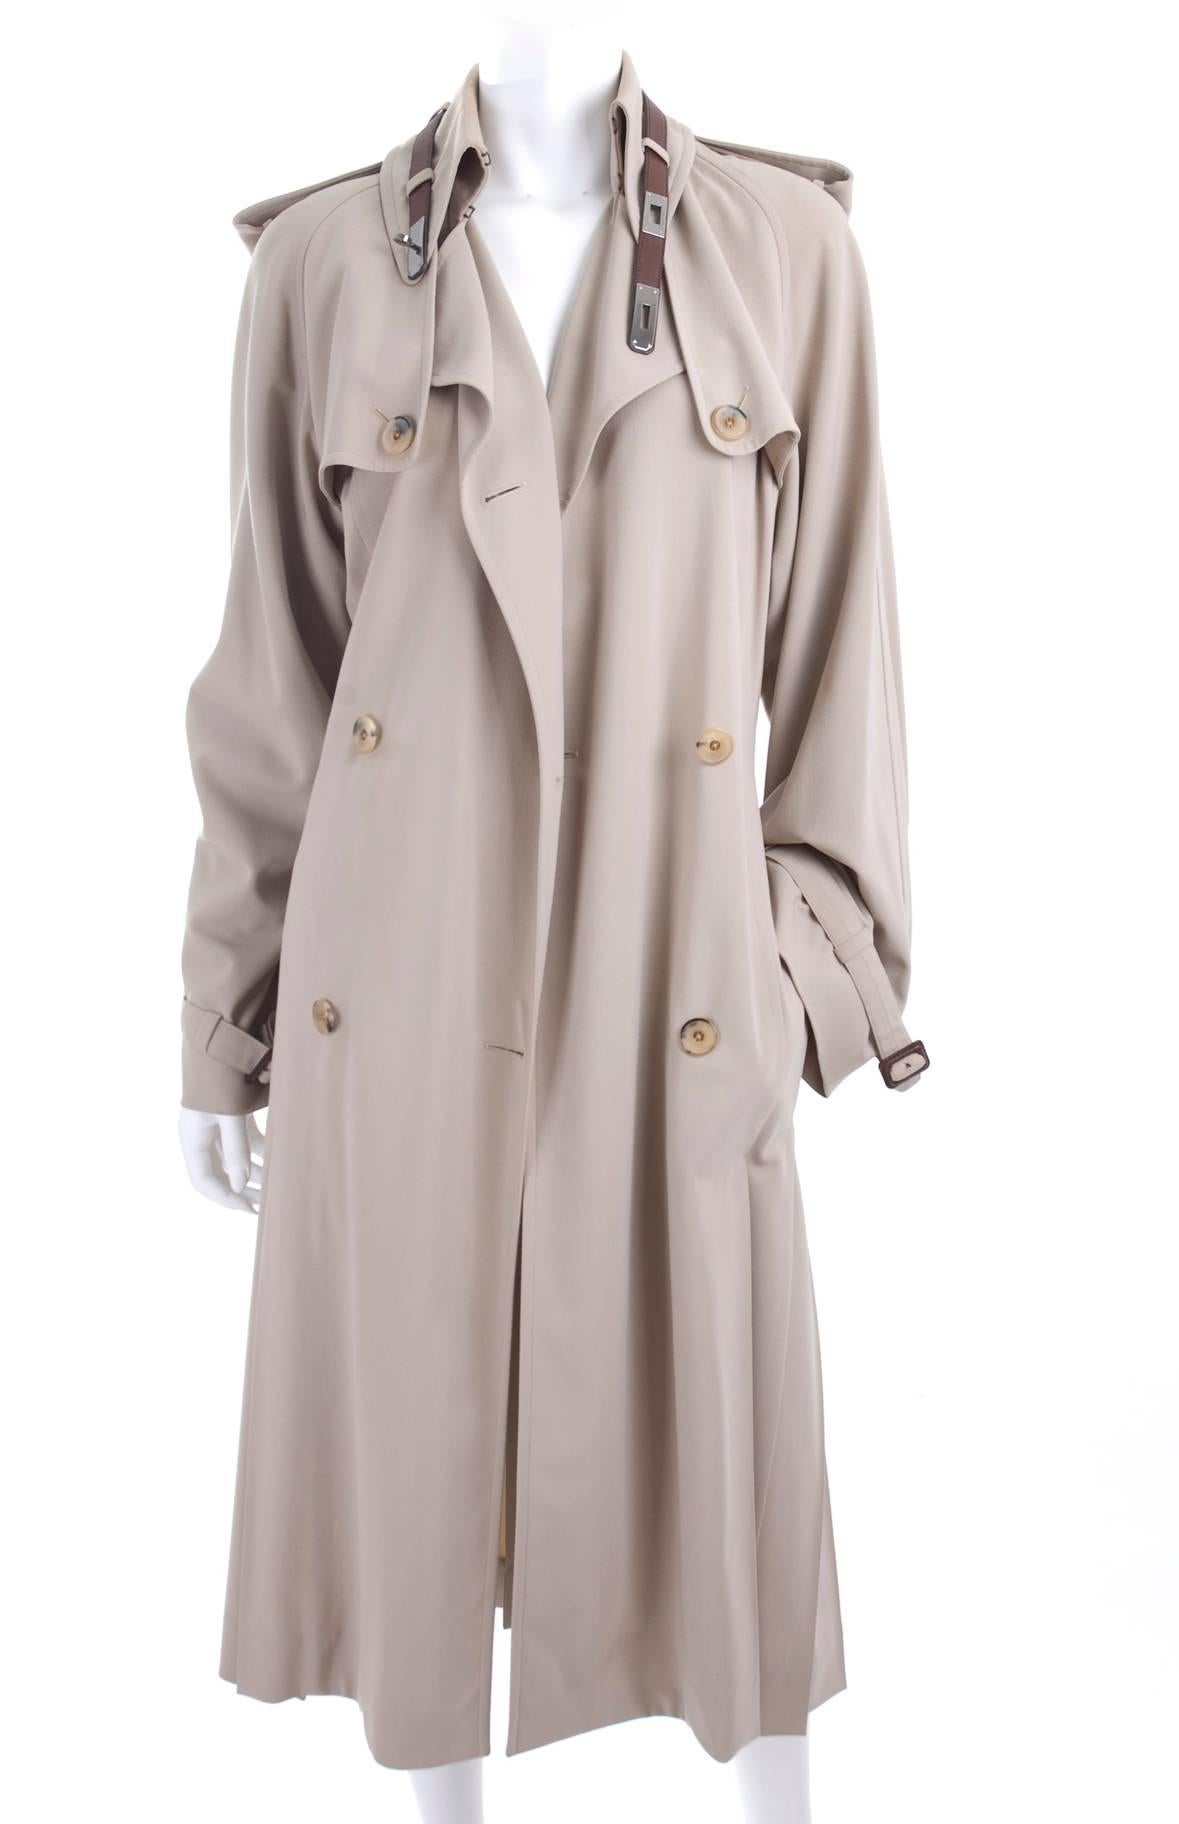 90's Hermes Trench Coat in beige with brown leather belt around the neckline.
Material 96% virgin wool 4% elastane.
Excellent condition.
Size 38 EU

Measurements:
Length 46